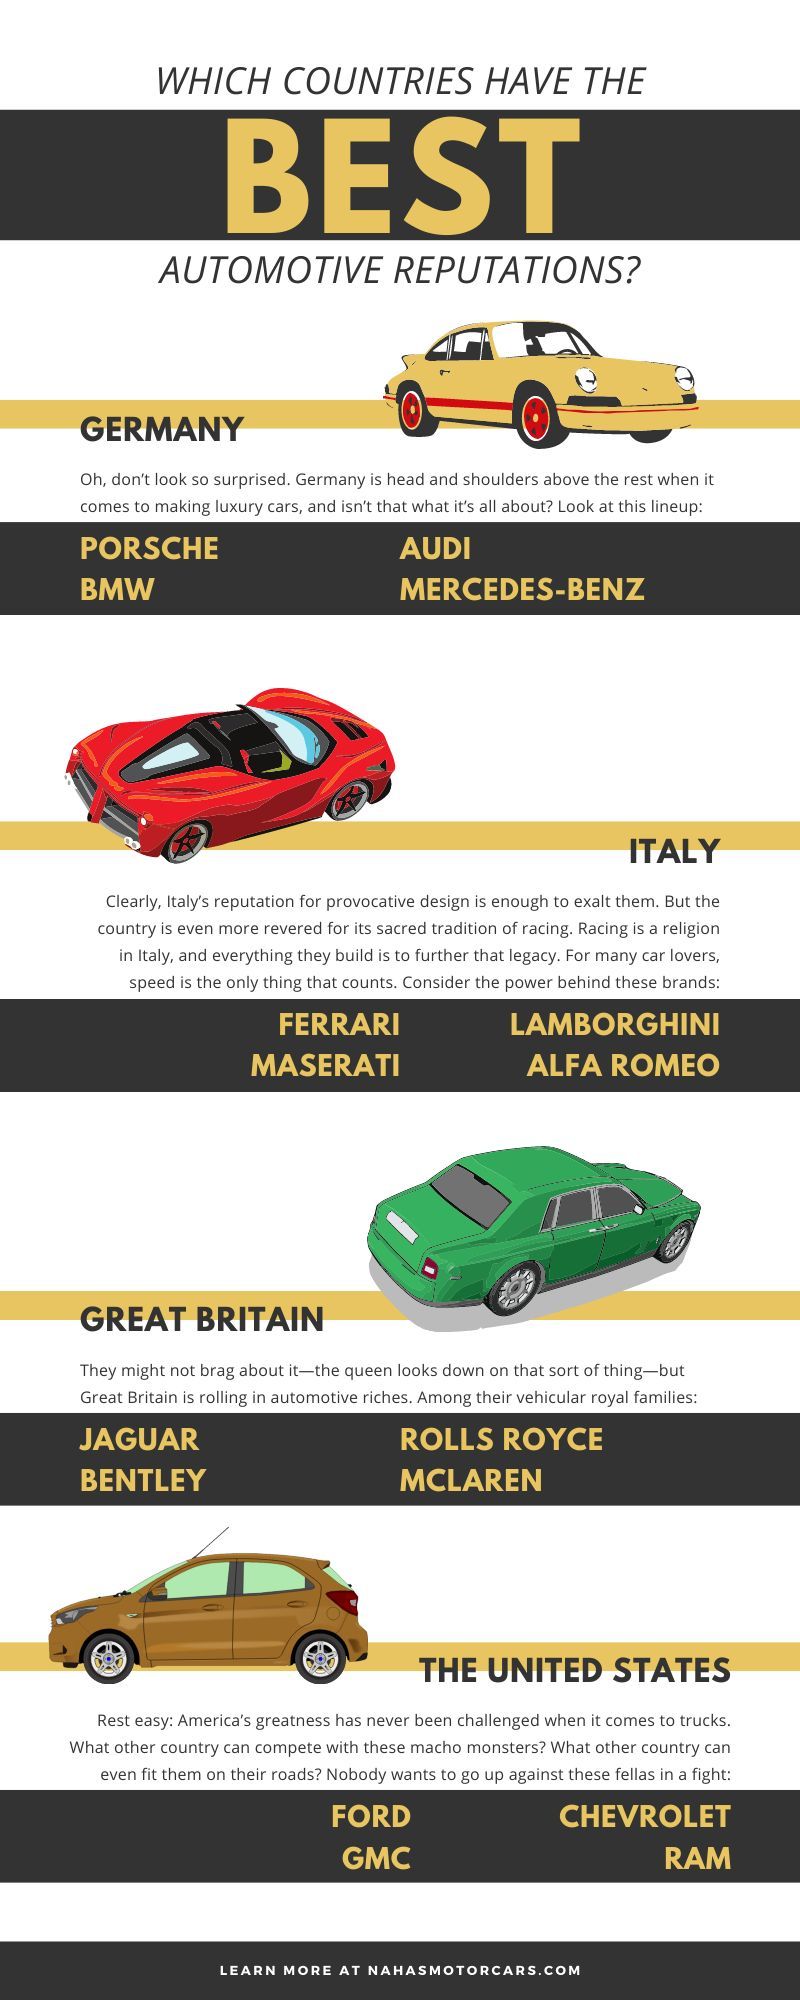 Which Countries Have the Best Automotive Reputations?